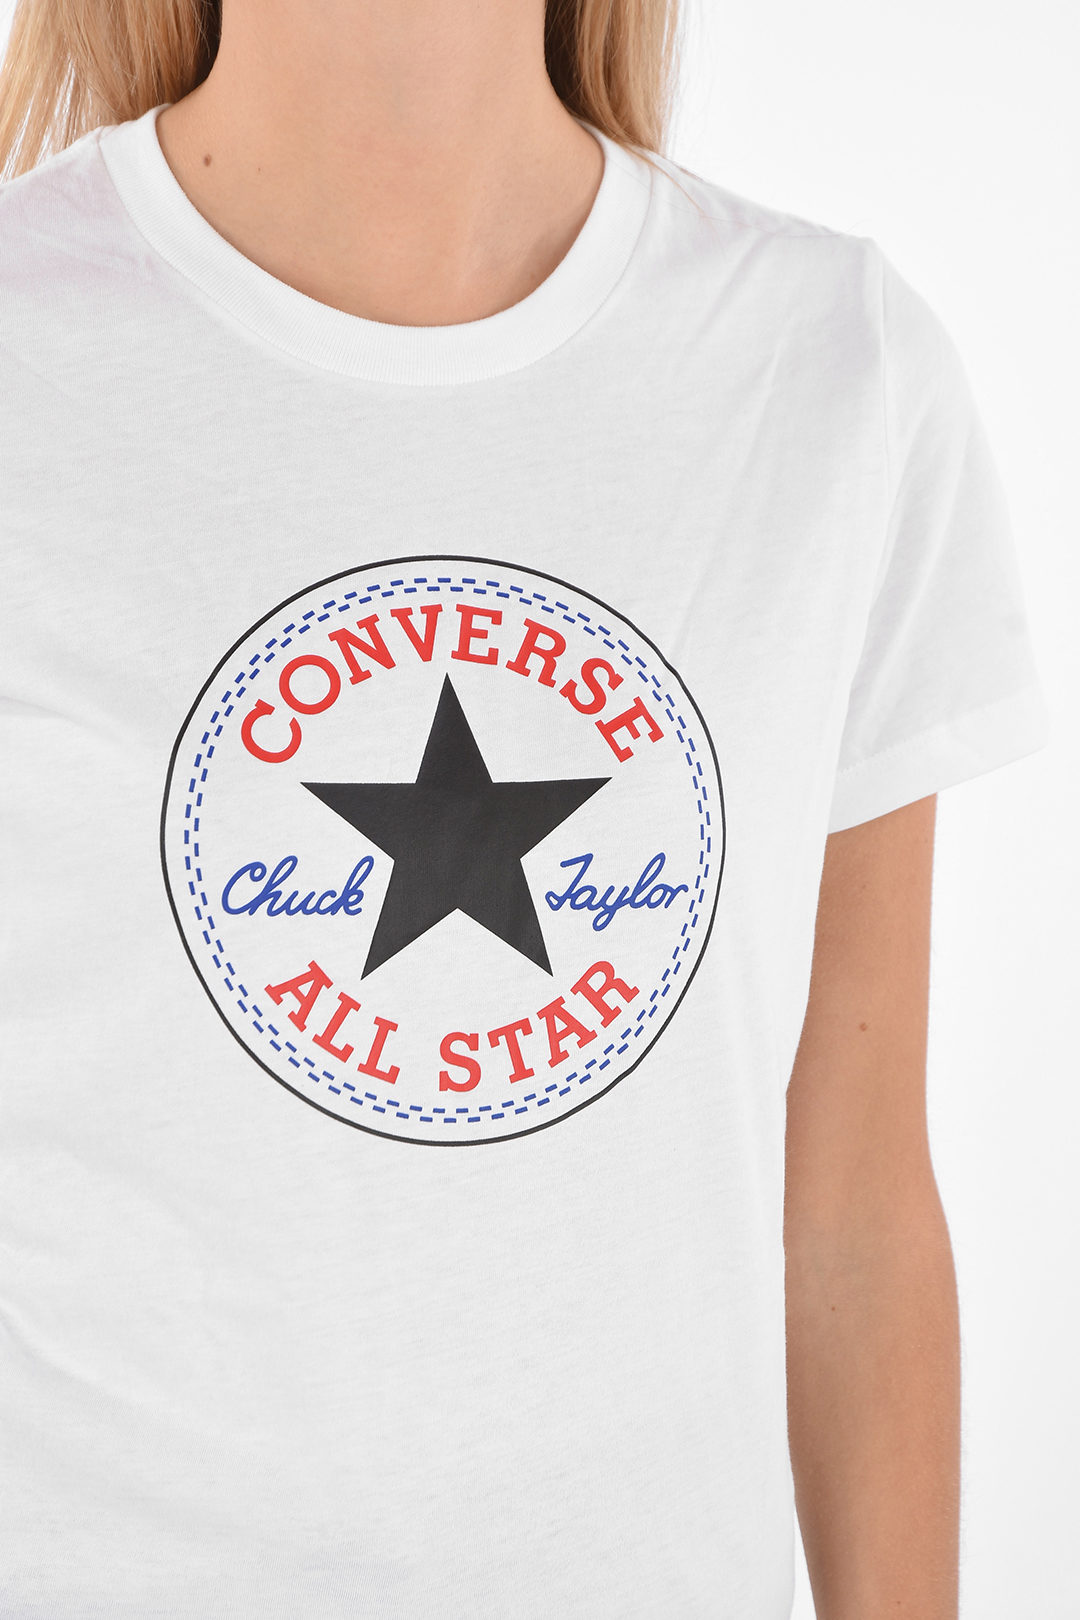 Converse ALL STAR Printed T-shirt Glamood Outlet